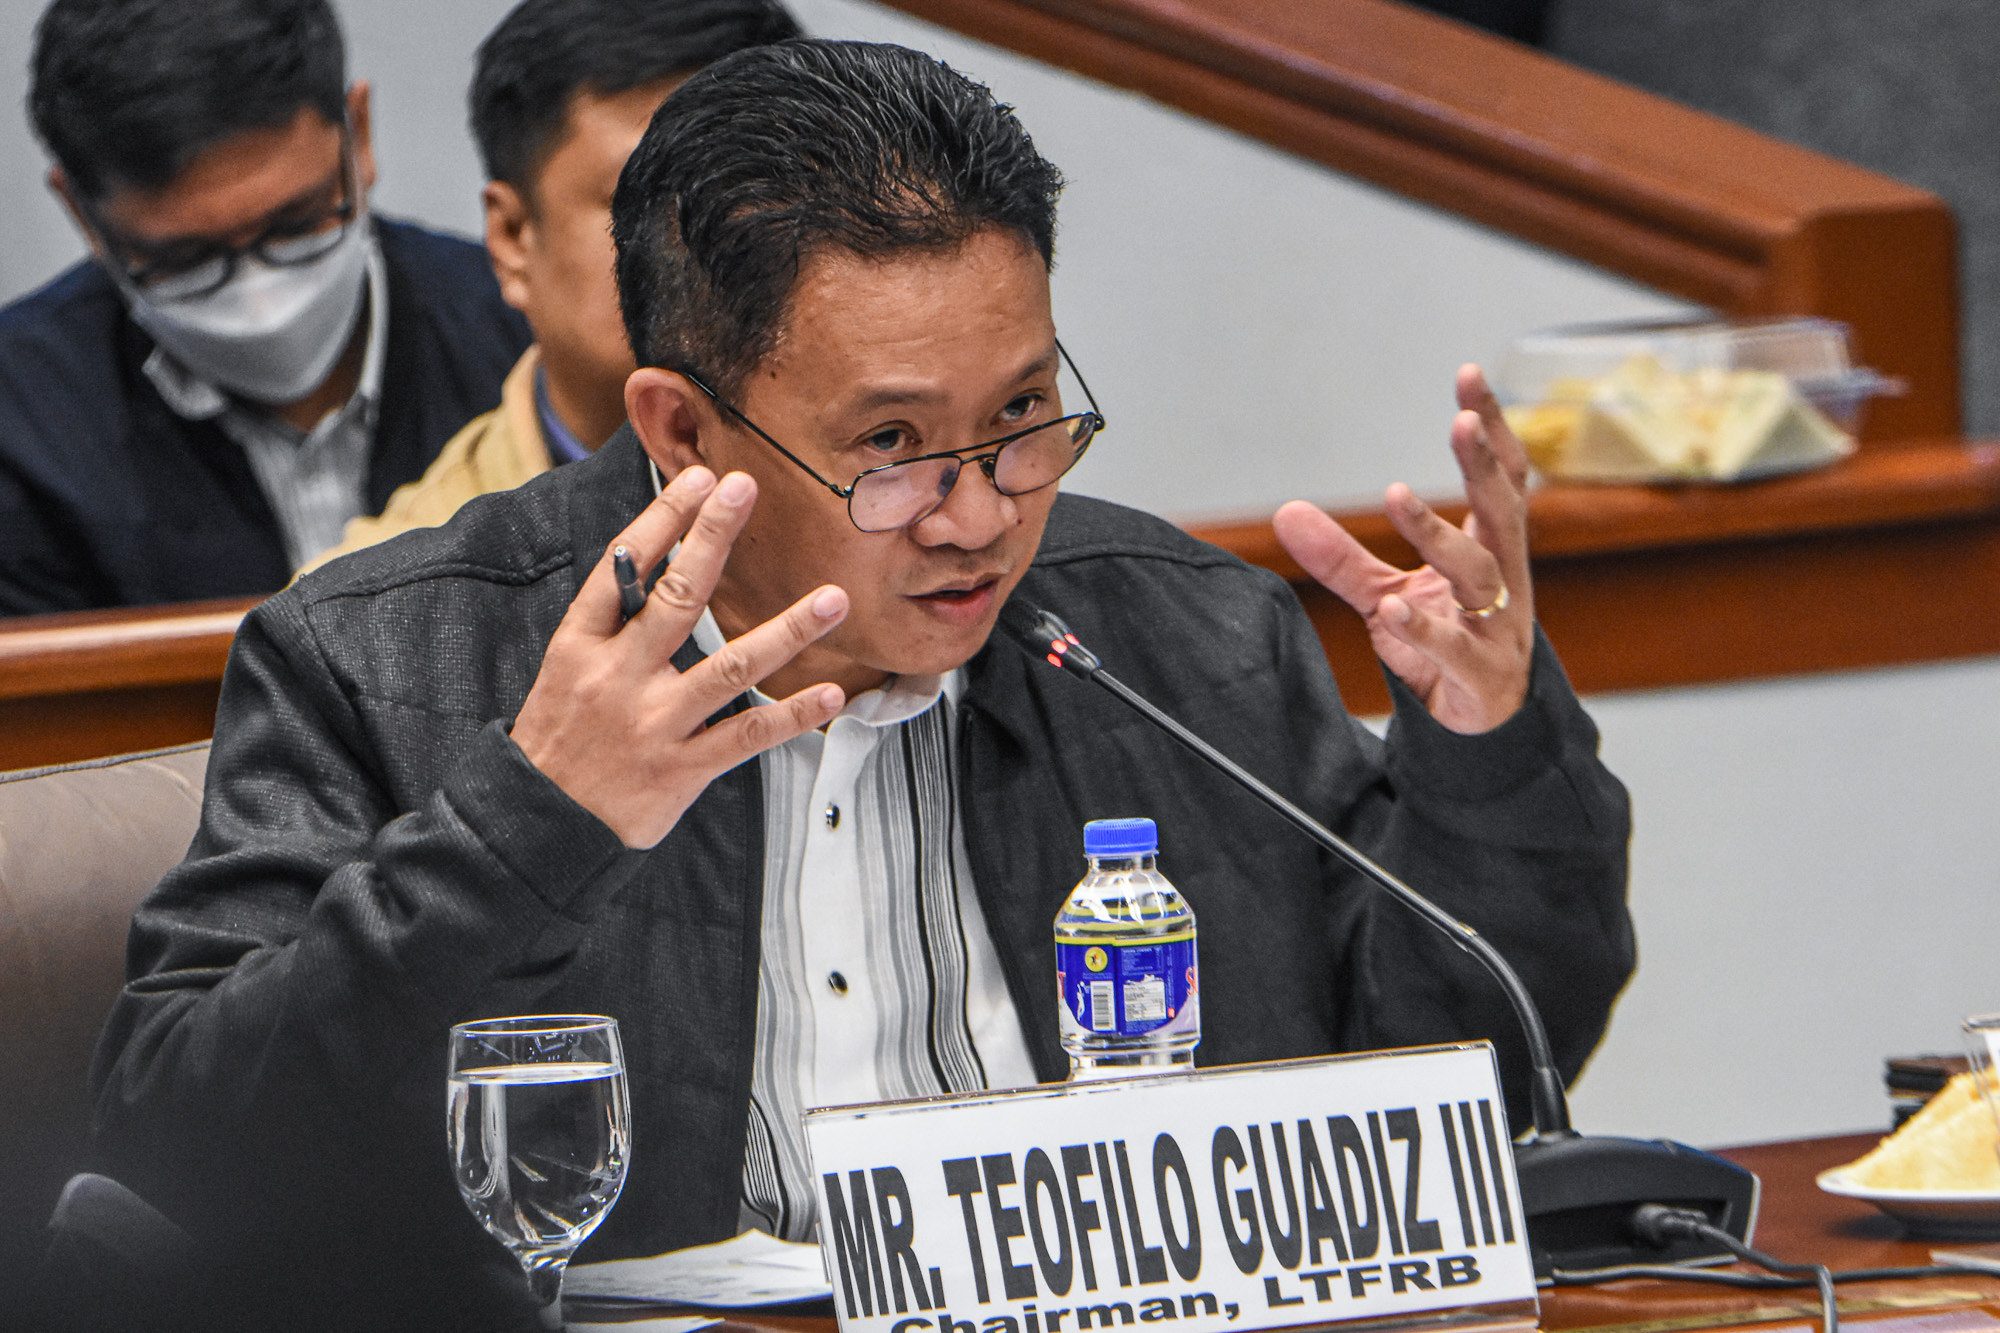 Malacañang reinstates Teofilo Guadiz as LTFRB head after weathering corruption allegations